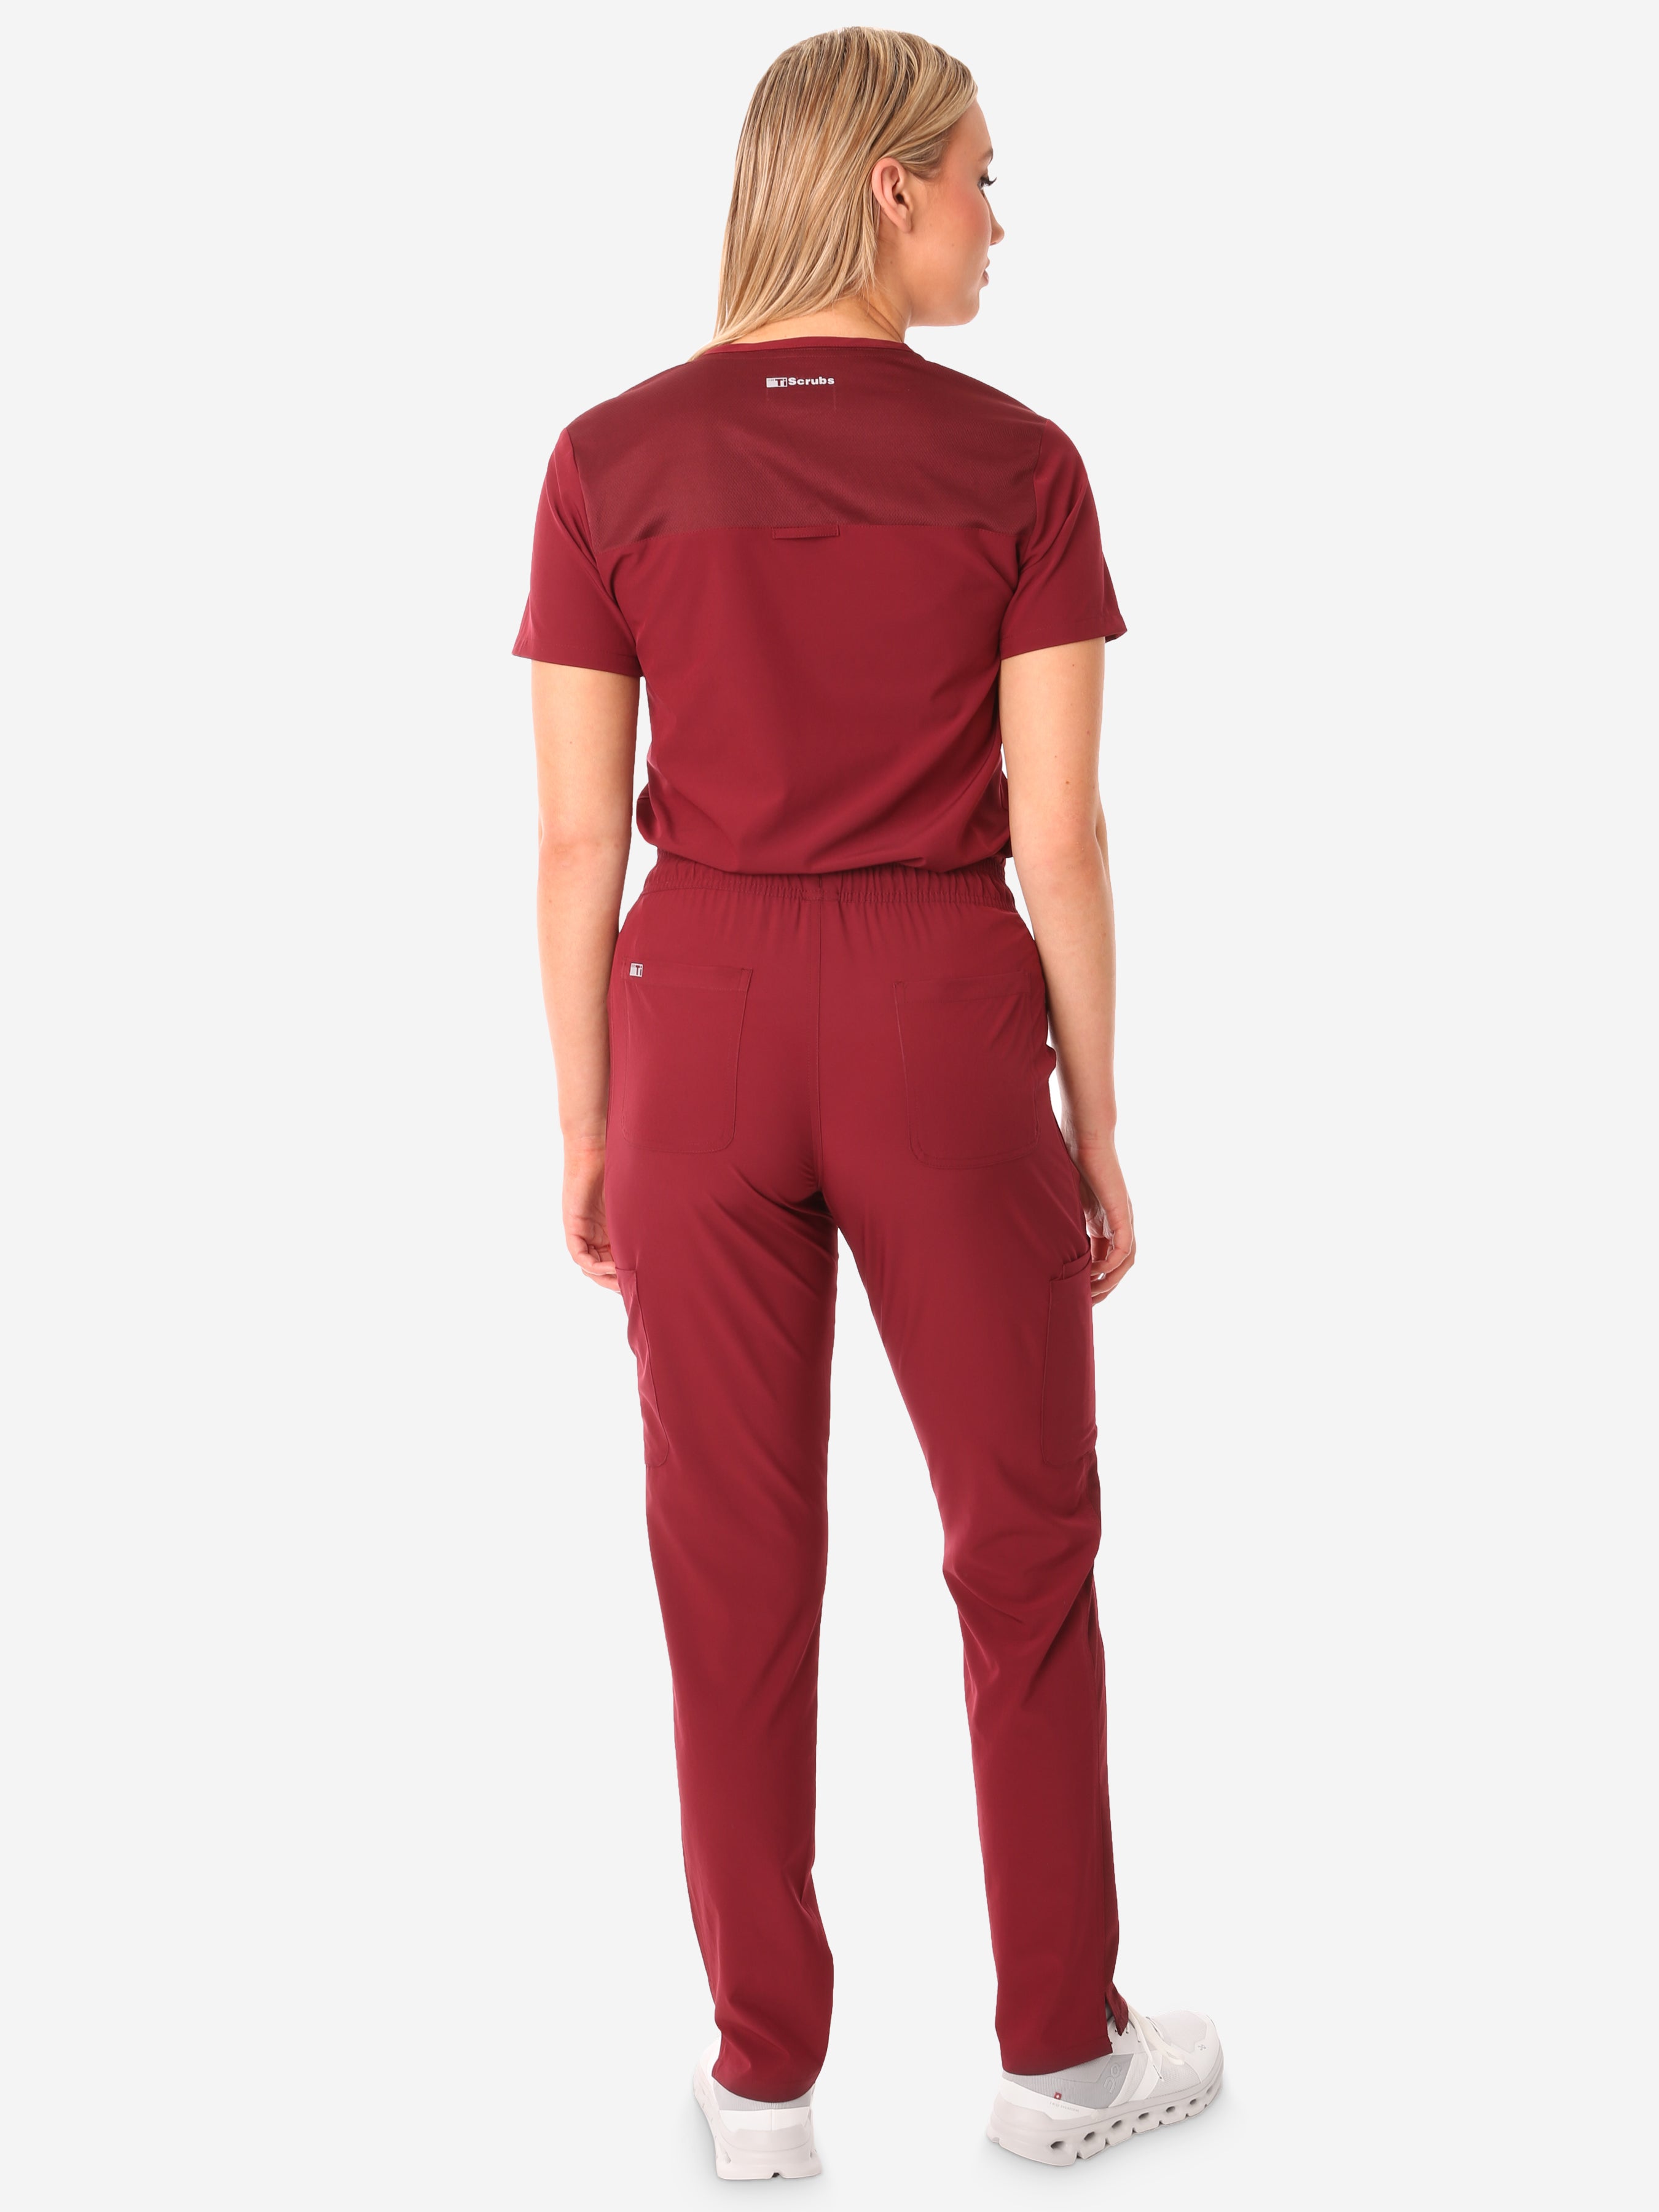 TiScrubs Bold Burgundy Women&#39;s Stretch 9-Pocket Pants and One-Pocket Tuckable Top Back View Full Body